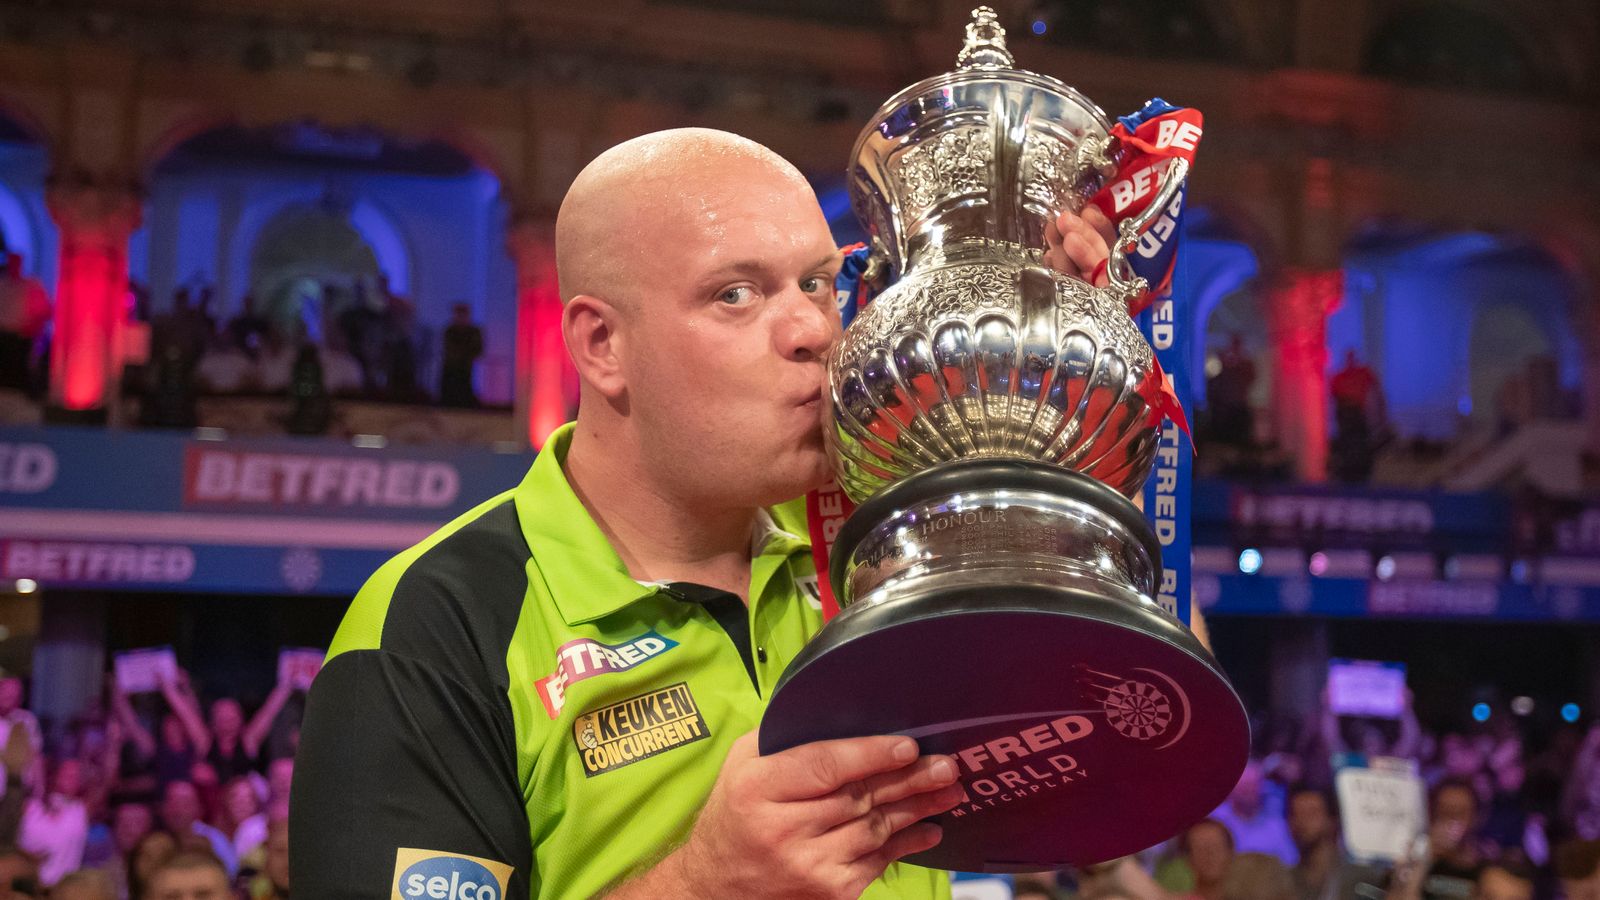 World Matchplay Darts: Michael van Gerwen lifts his third title in Blackpool after beating Gerwyn Price